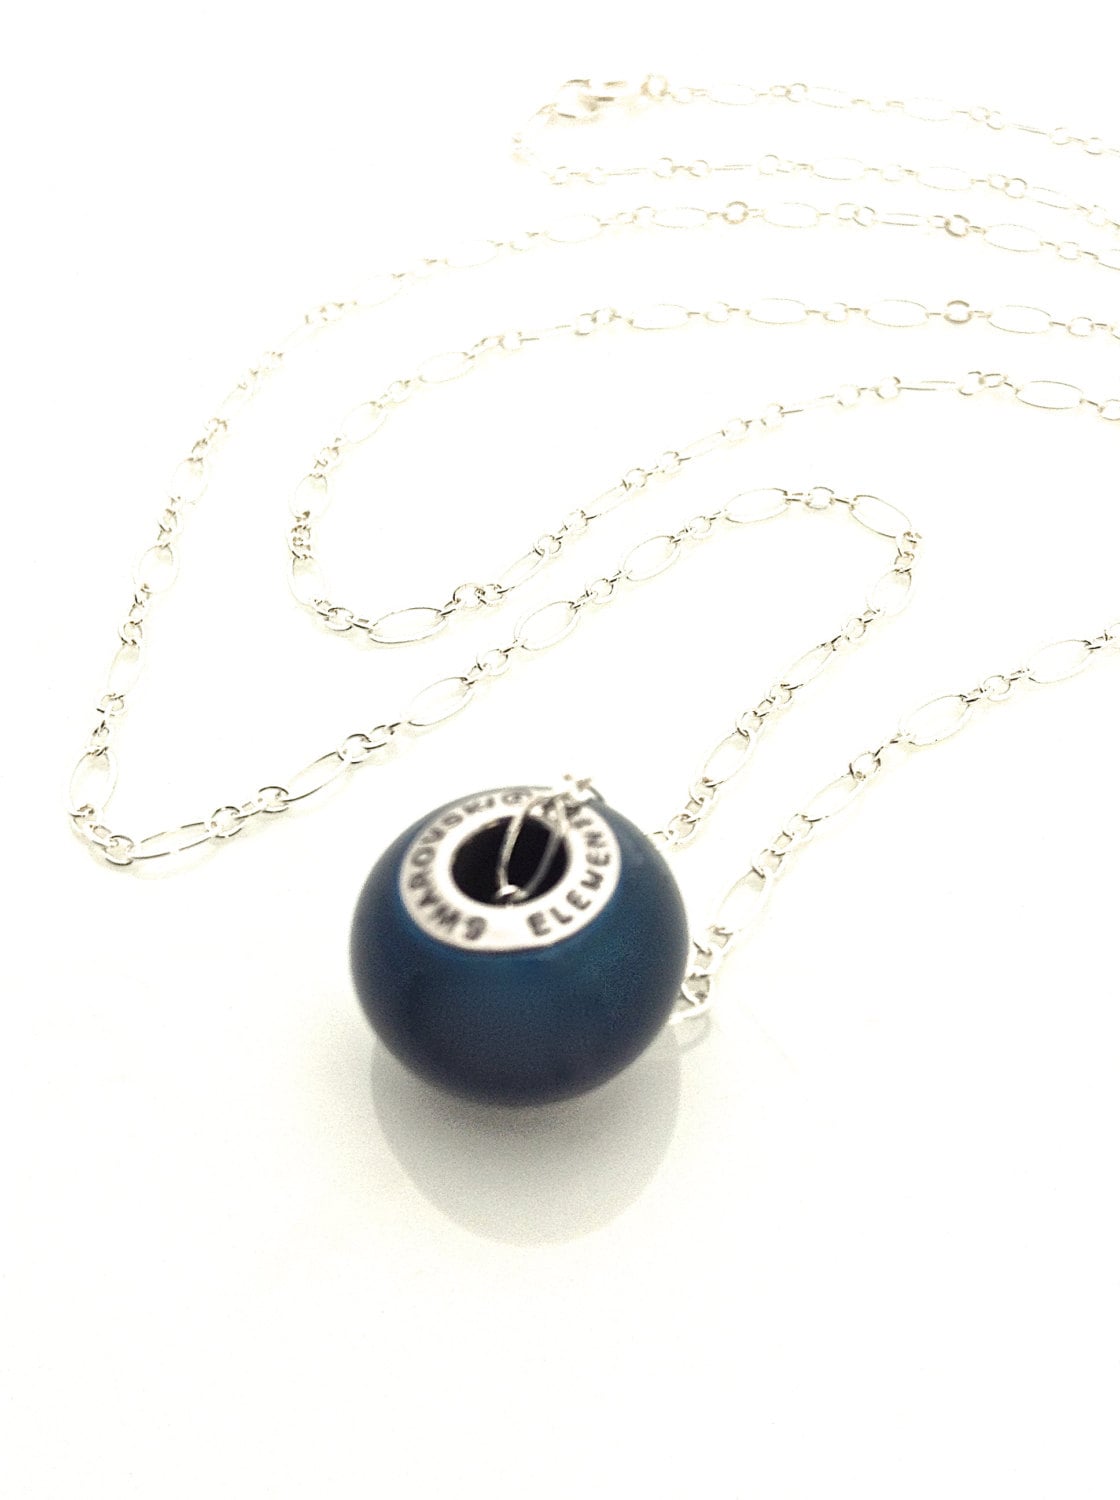 Dark Blue Necklace, Navy Blue Necklace,  Dark Teal Necklace, Simple Pearl Pendant, 24 inch Silver Chain, Vegan Necklace - UrbanClink